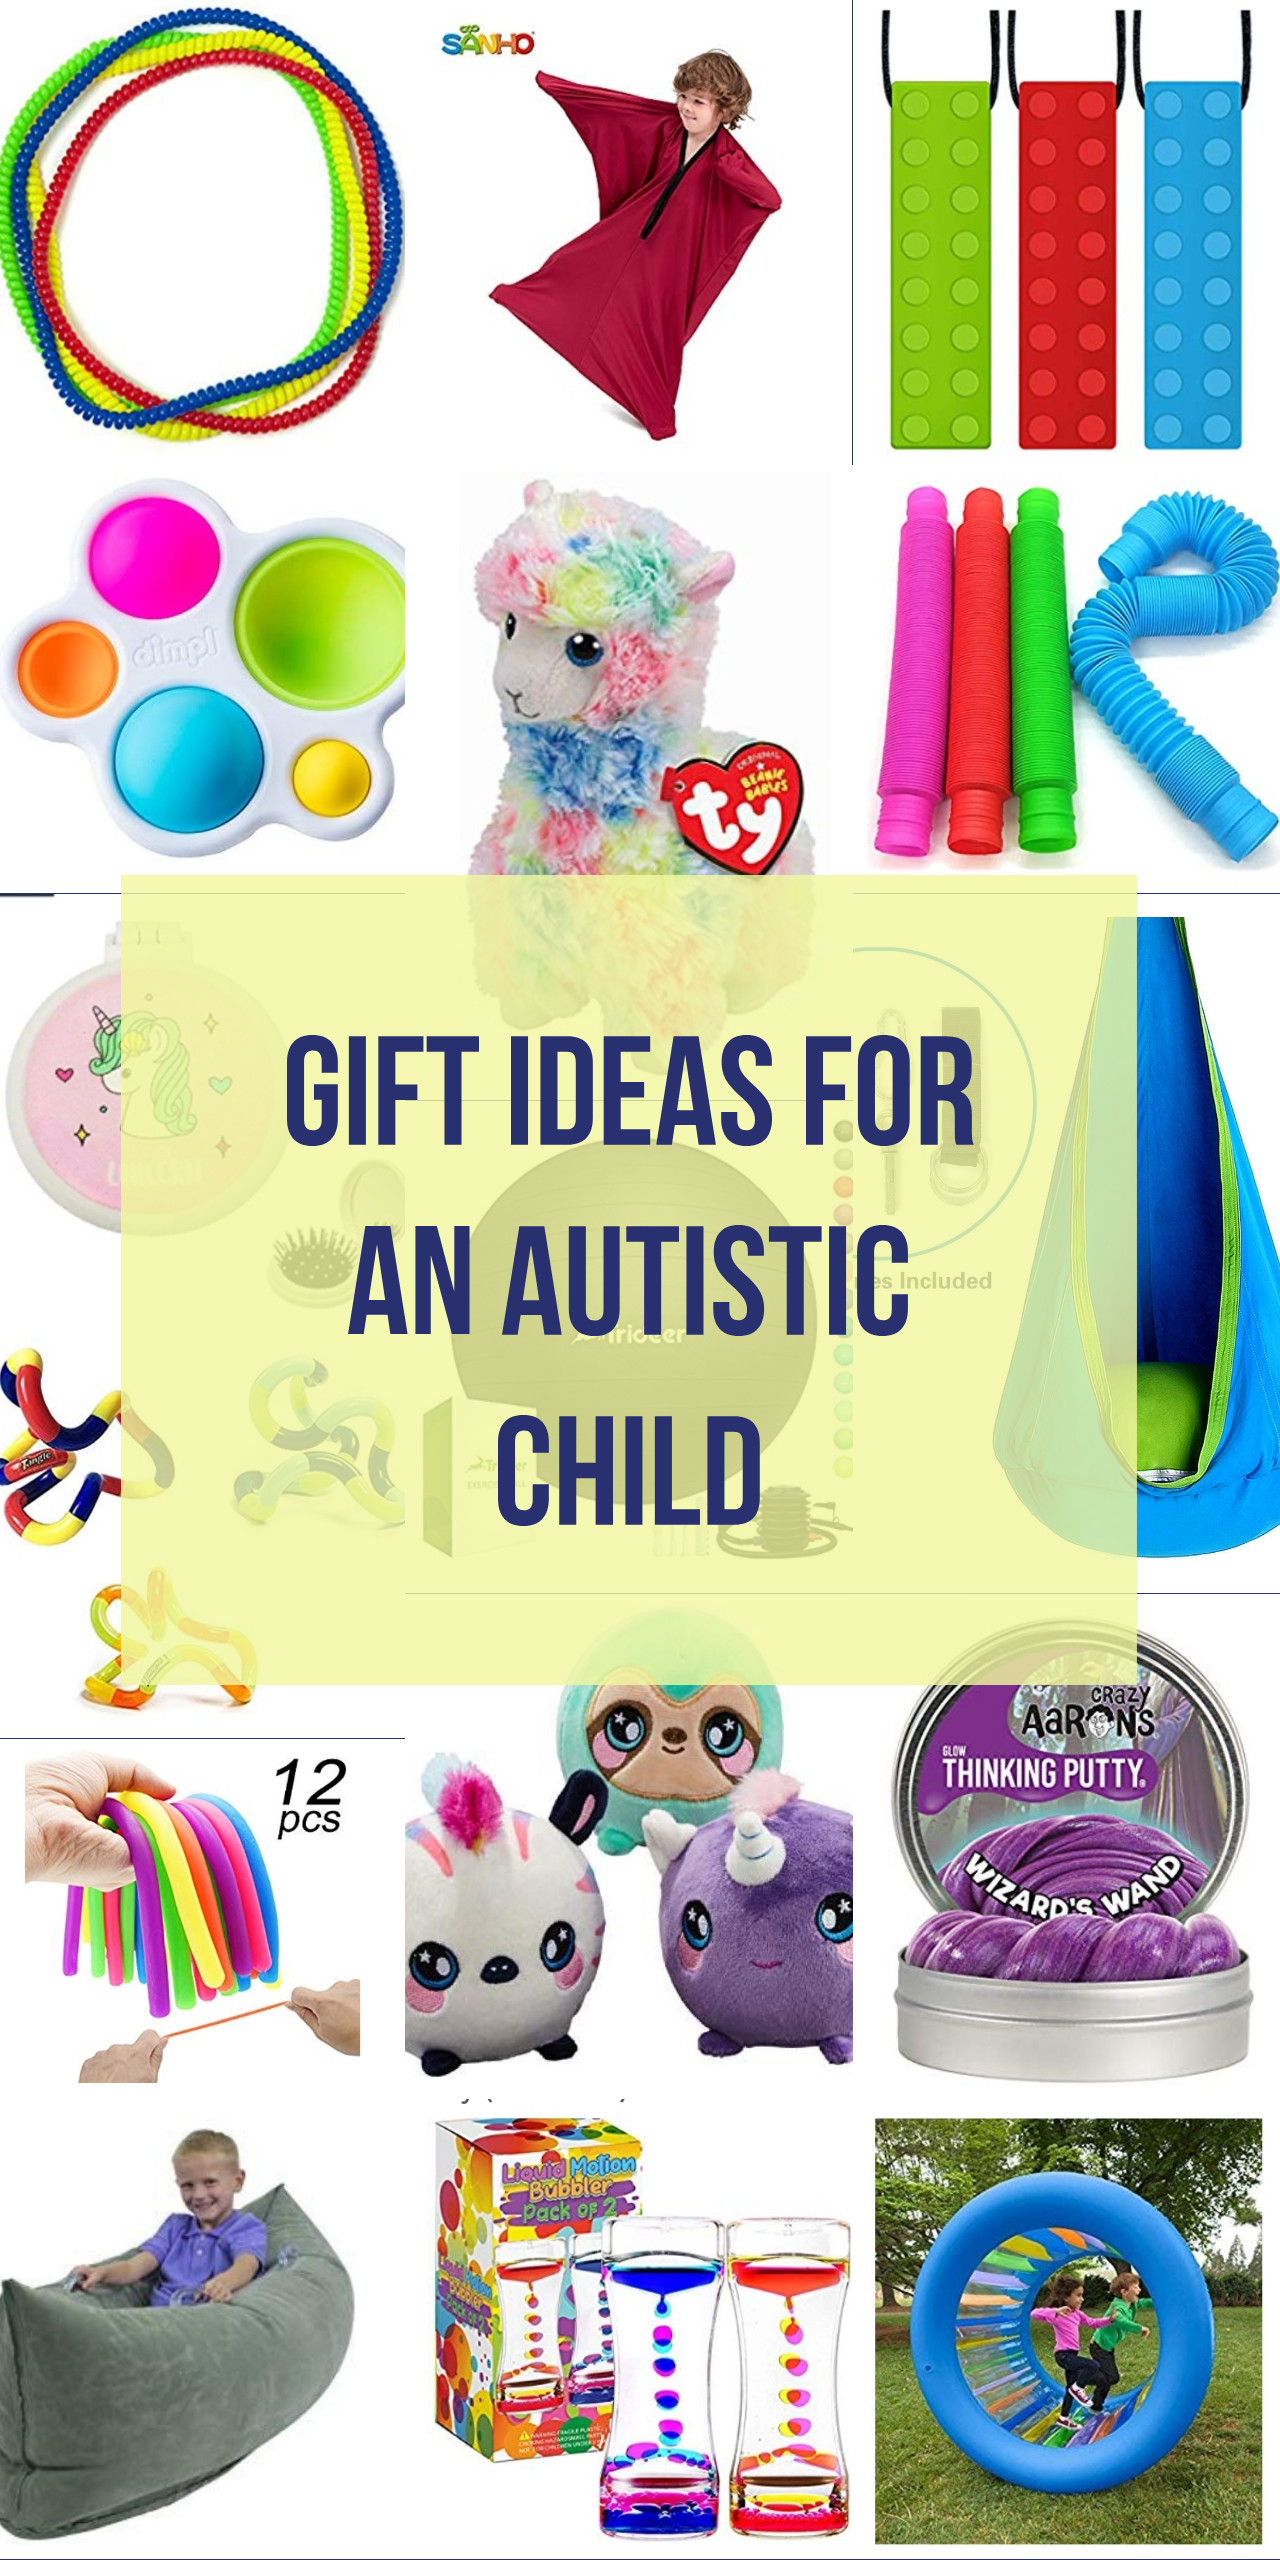 Gift For Autism Child
 Gift ideas for an autistic child